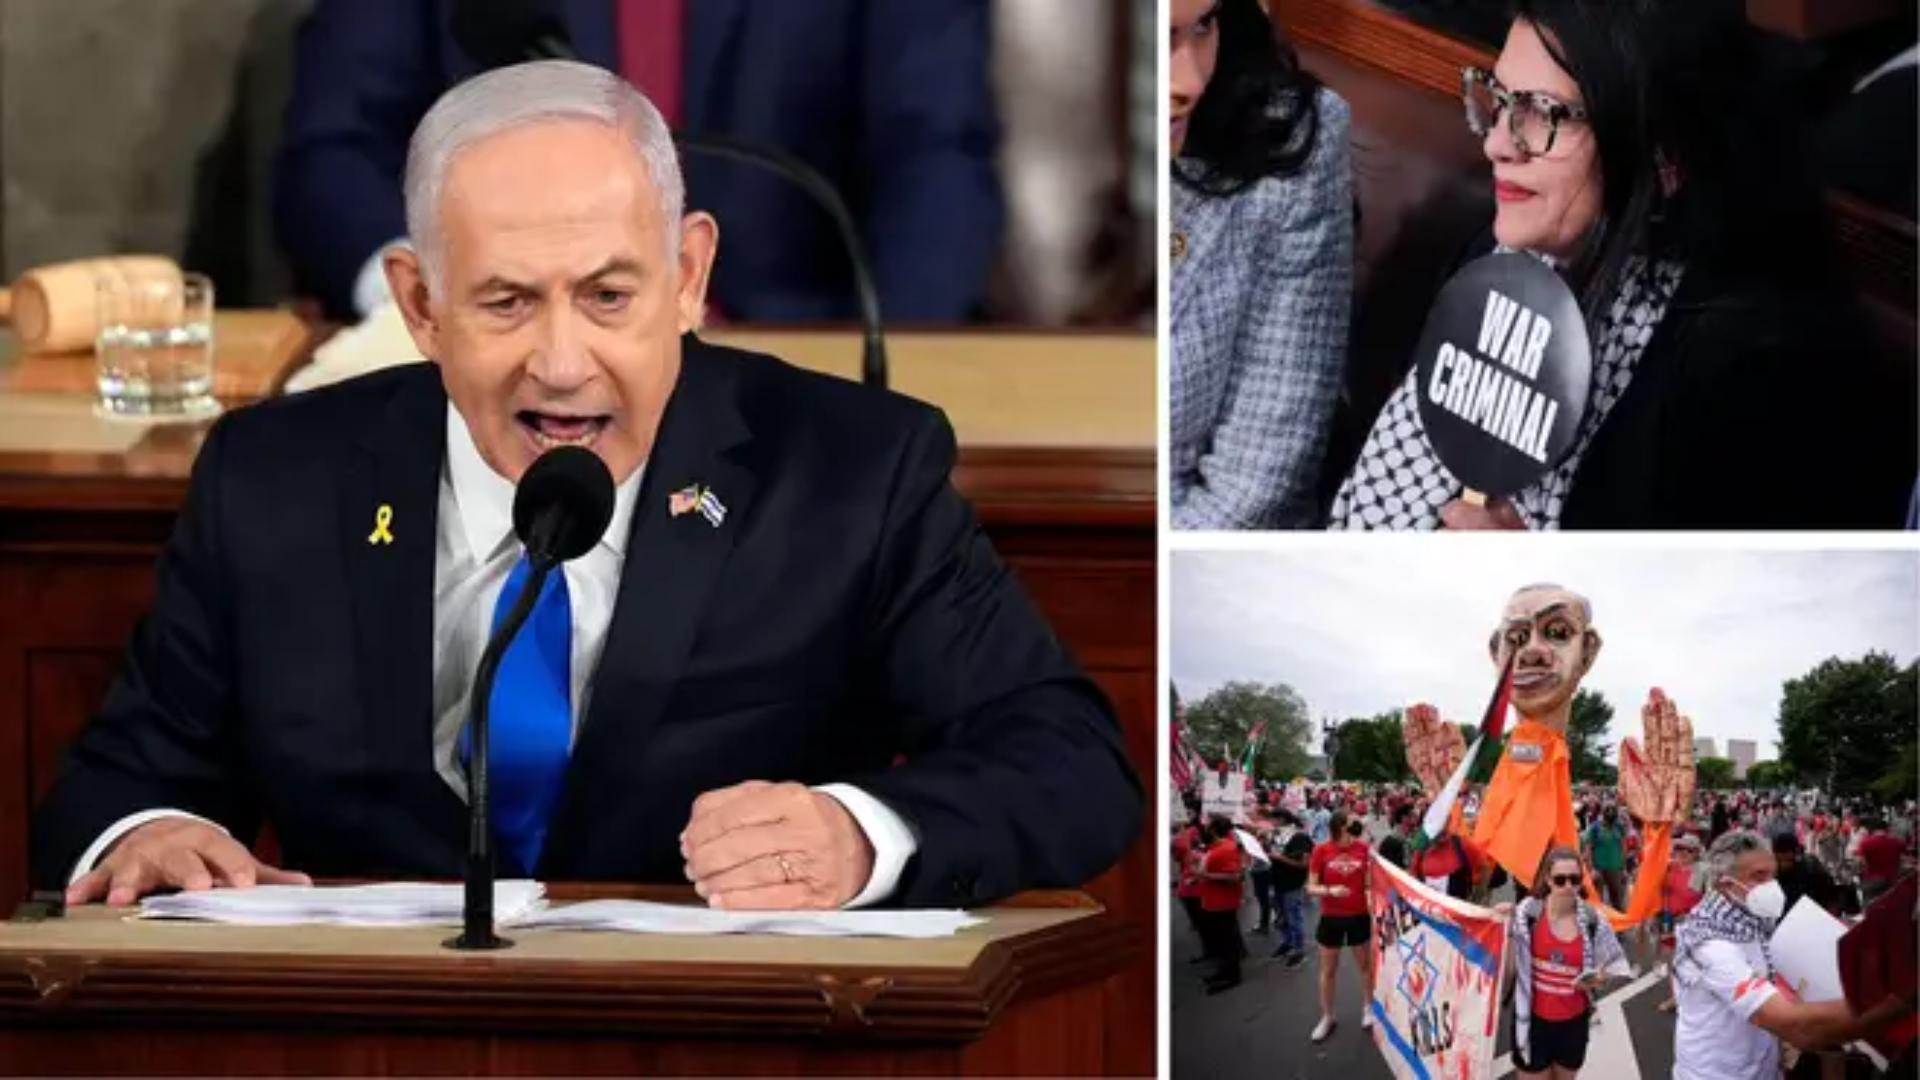 Six Arrested For Disrupting Netanyahu Speech At U.S. Capitol; Pepper Spray Used On Protesters